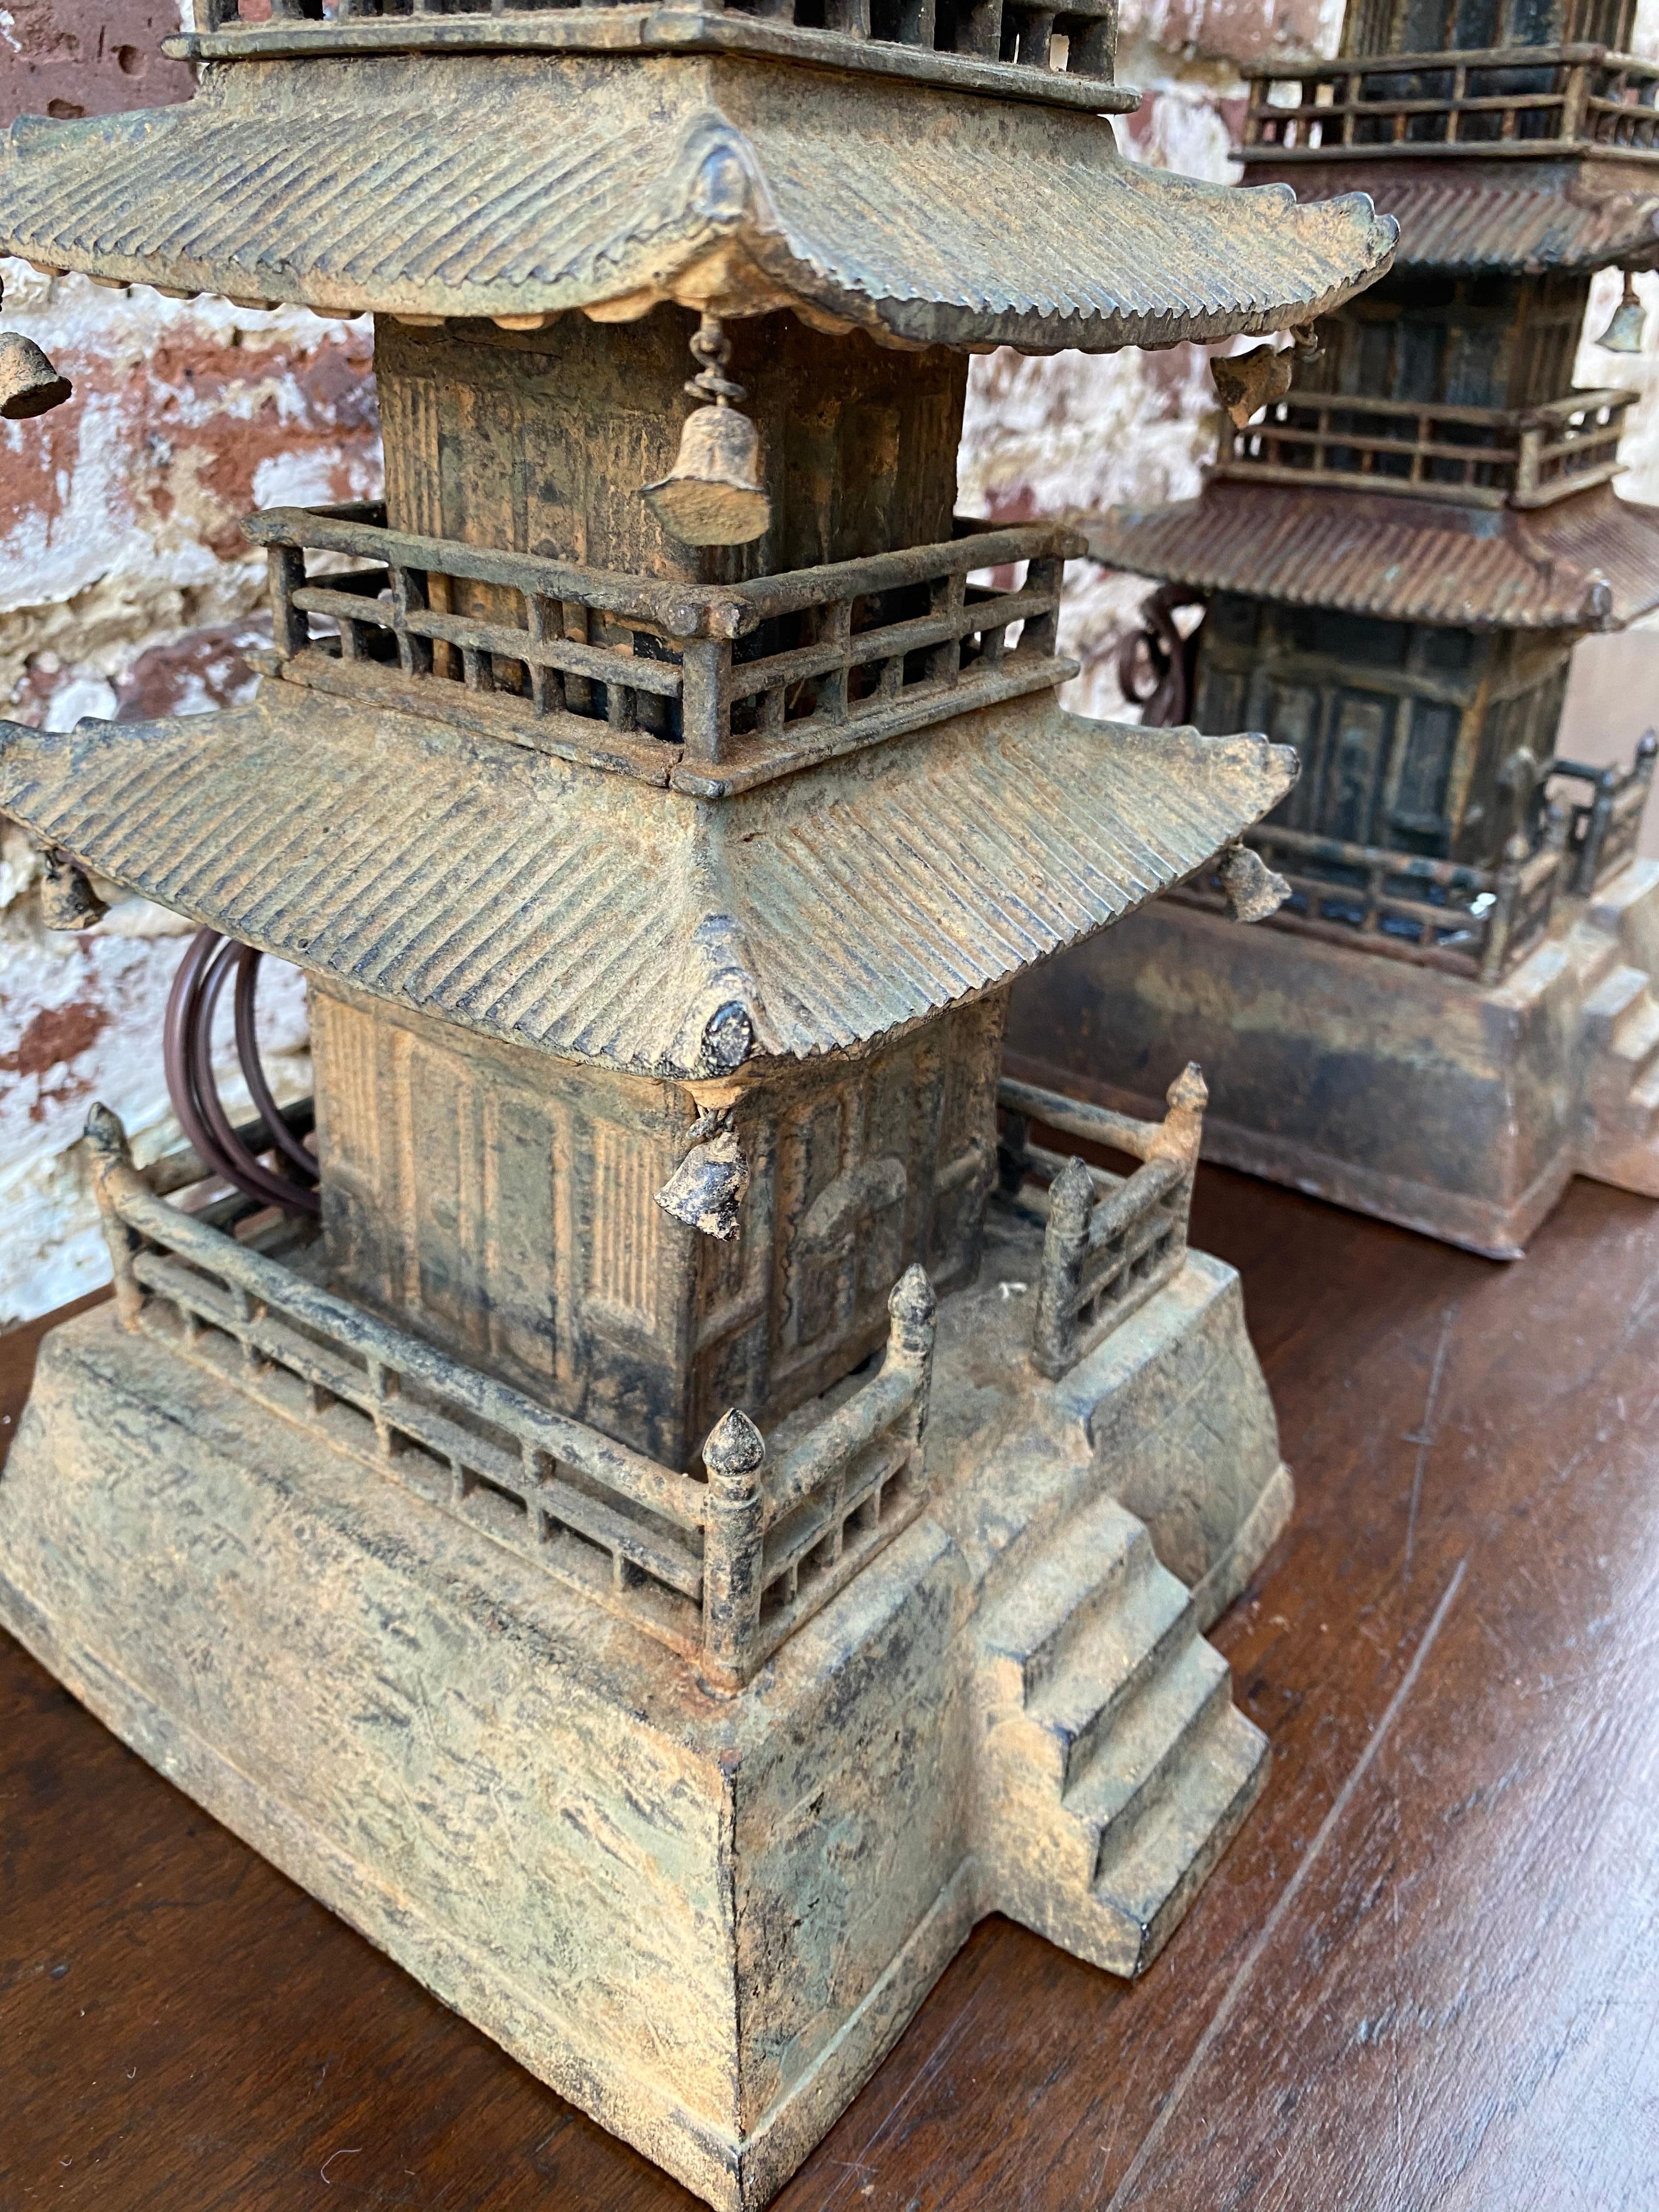 Pagoda form cast iron decorative pieces convert to lamps.